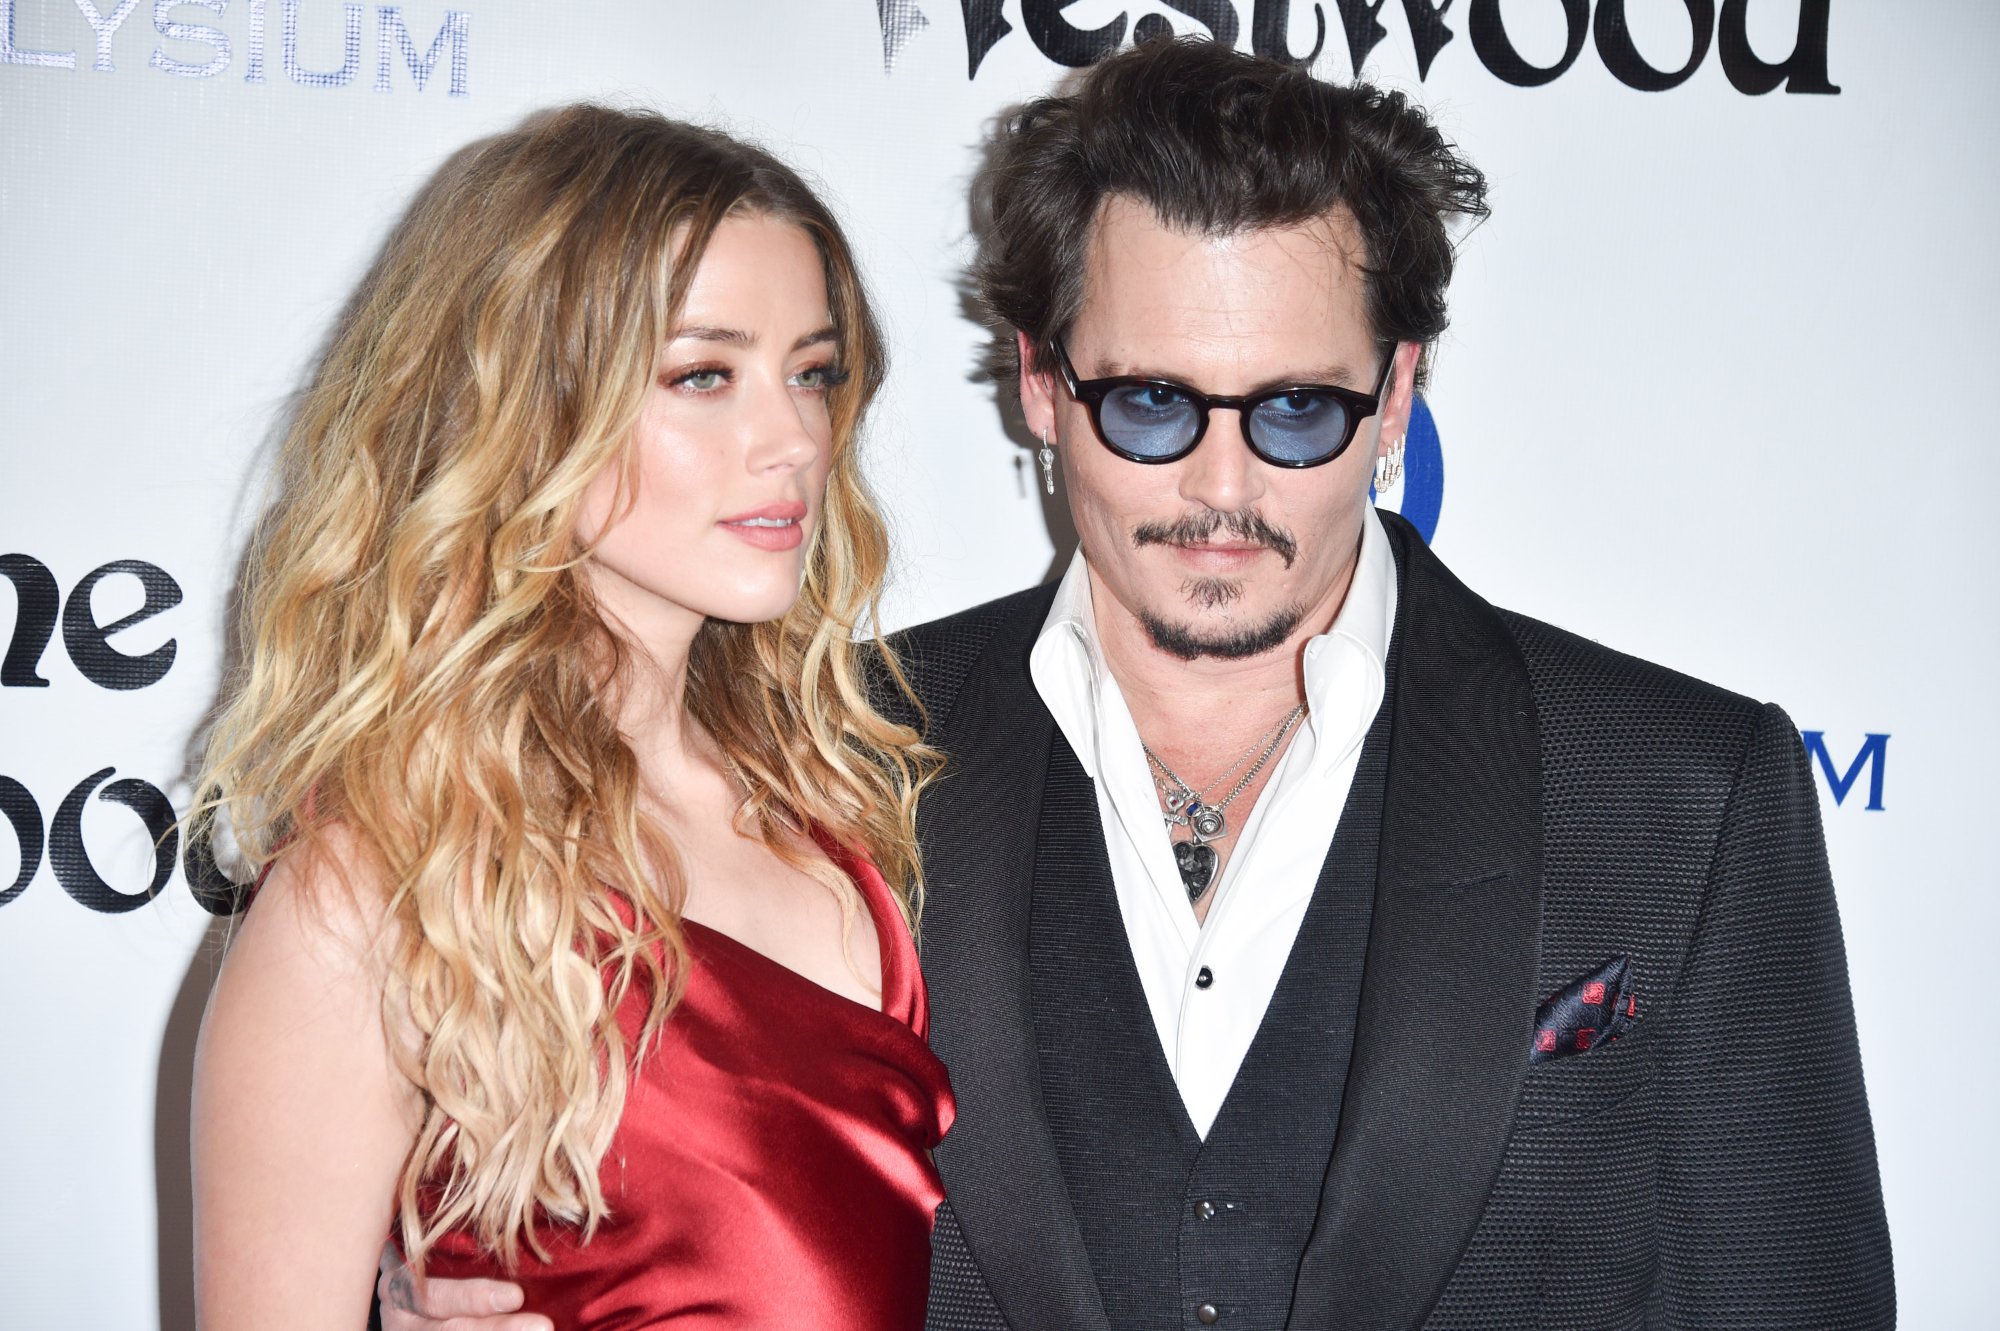 Amber Heard and Johnny Depp, who are in a court trial, standing in front of a white step and repeat with Heard in a red dress and Depp in a suit